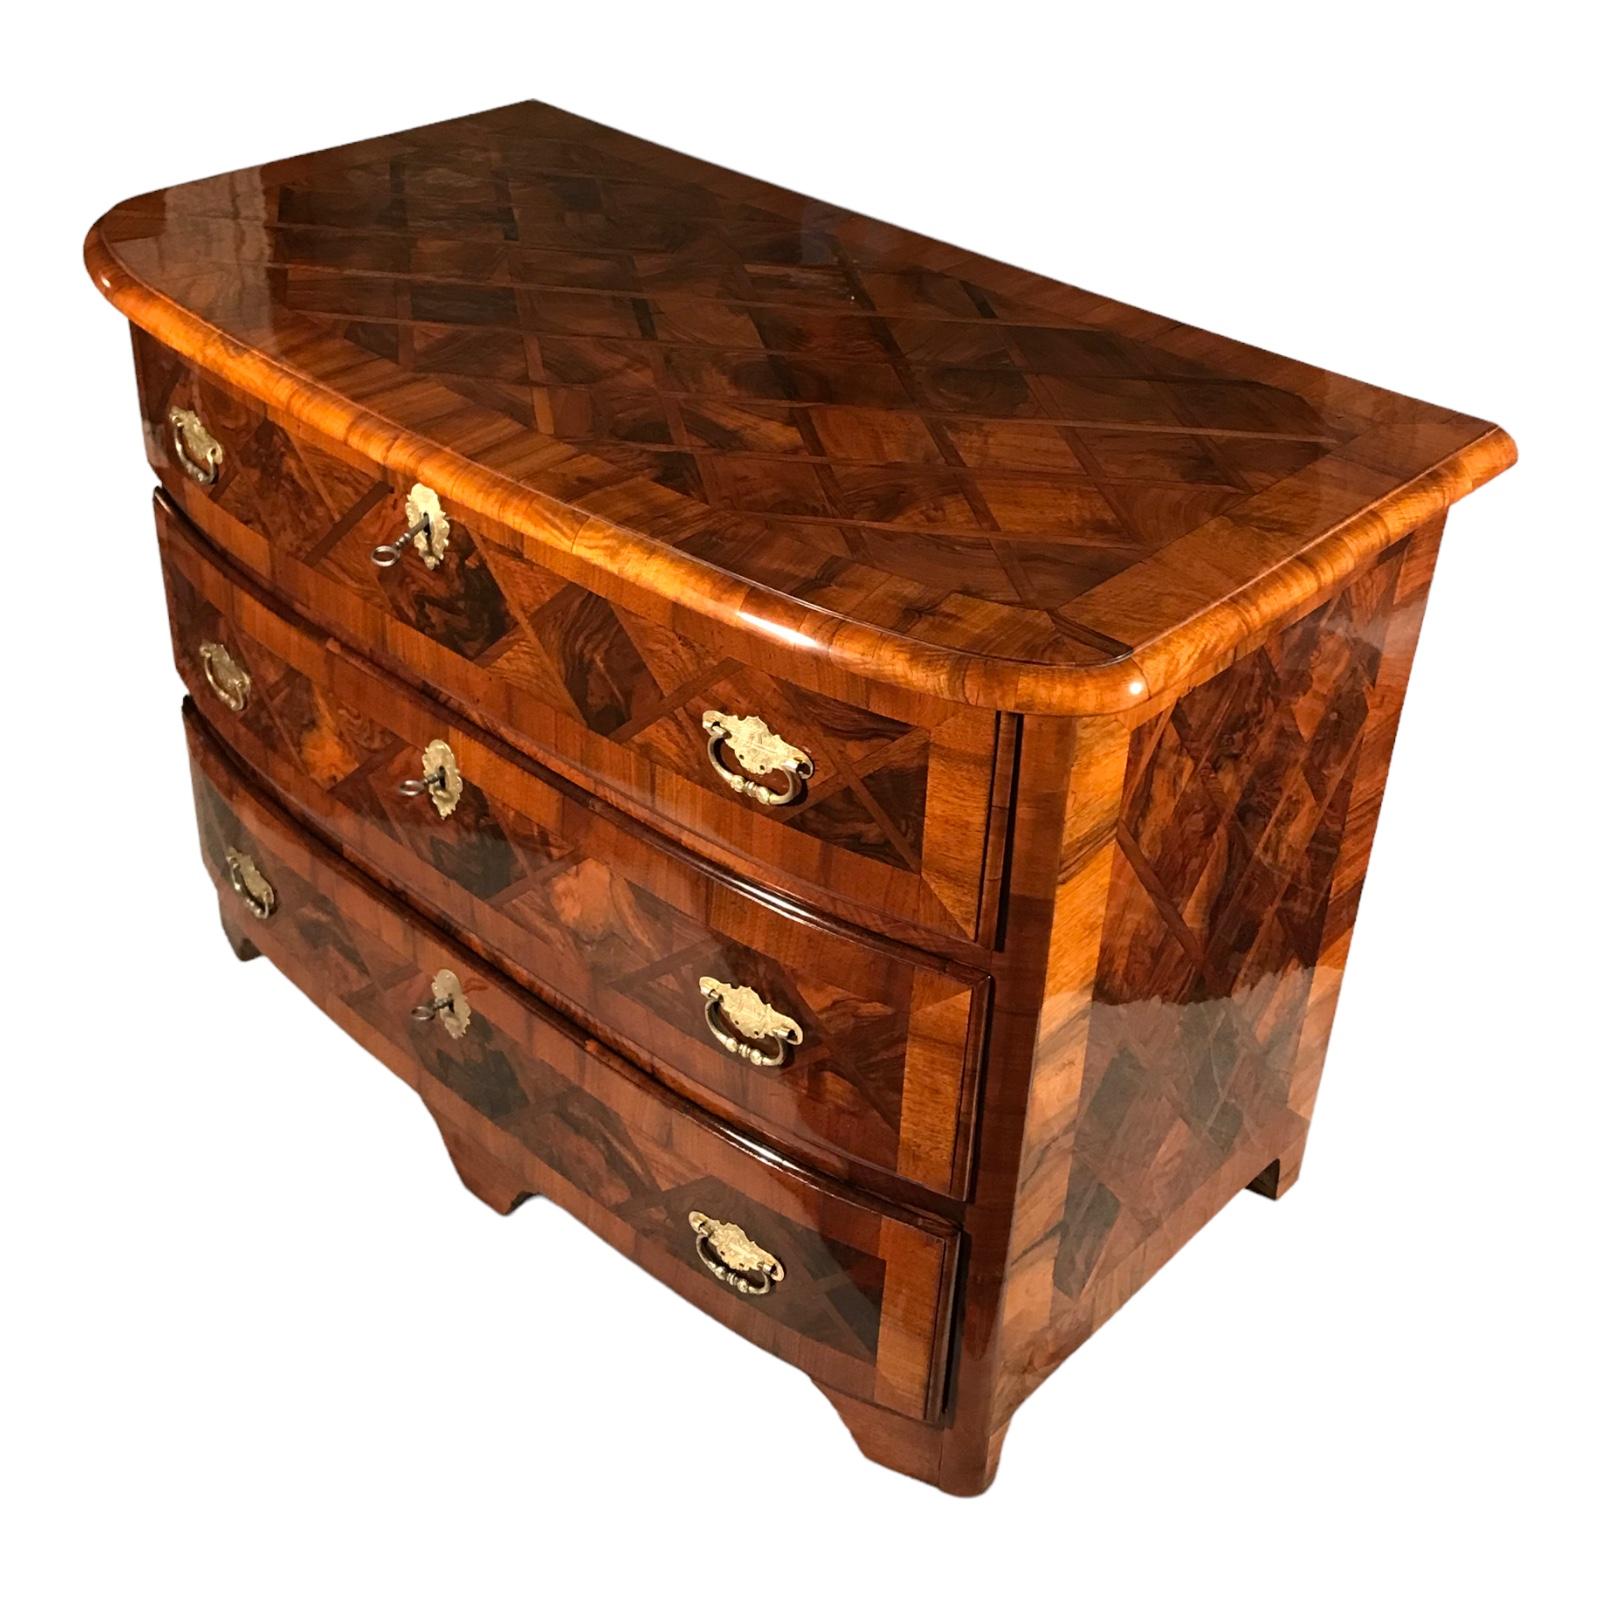 This original 18th century baroque chest of drawers comes from Switzerland. It dates back to around 1760. The three slightly convex three drawer chest has a very pretty walnut veneer pattern with diamond shaped inlays. The chest has been expertly